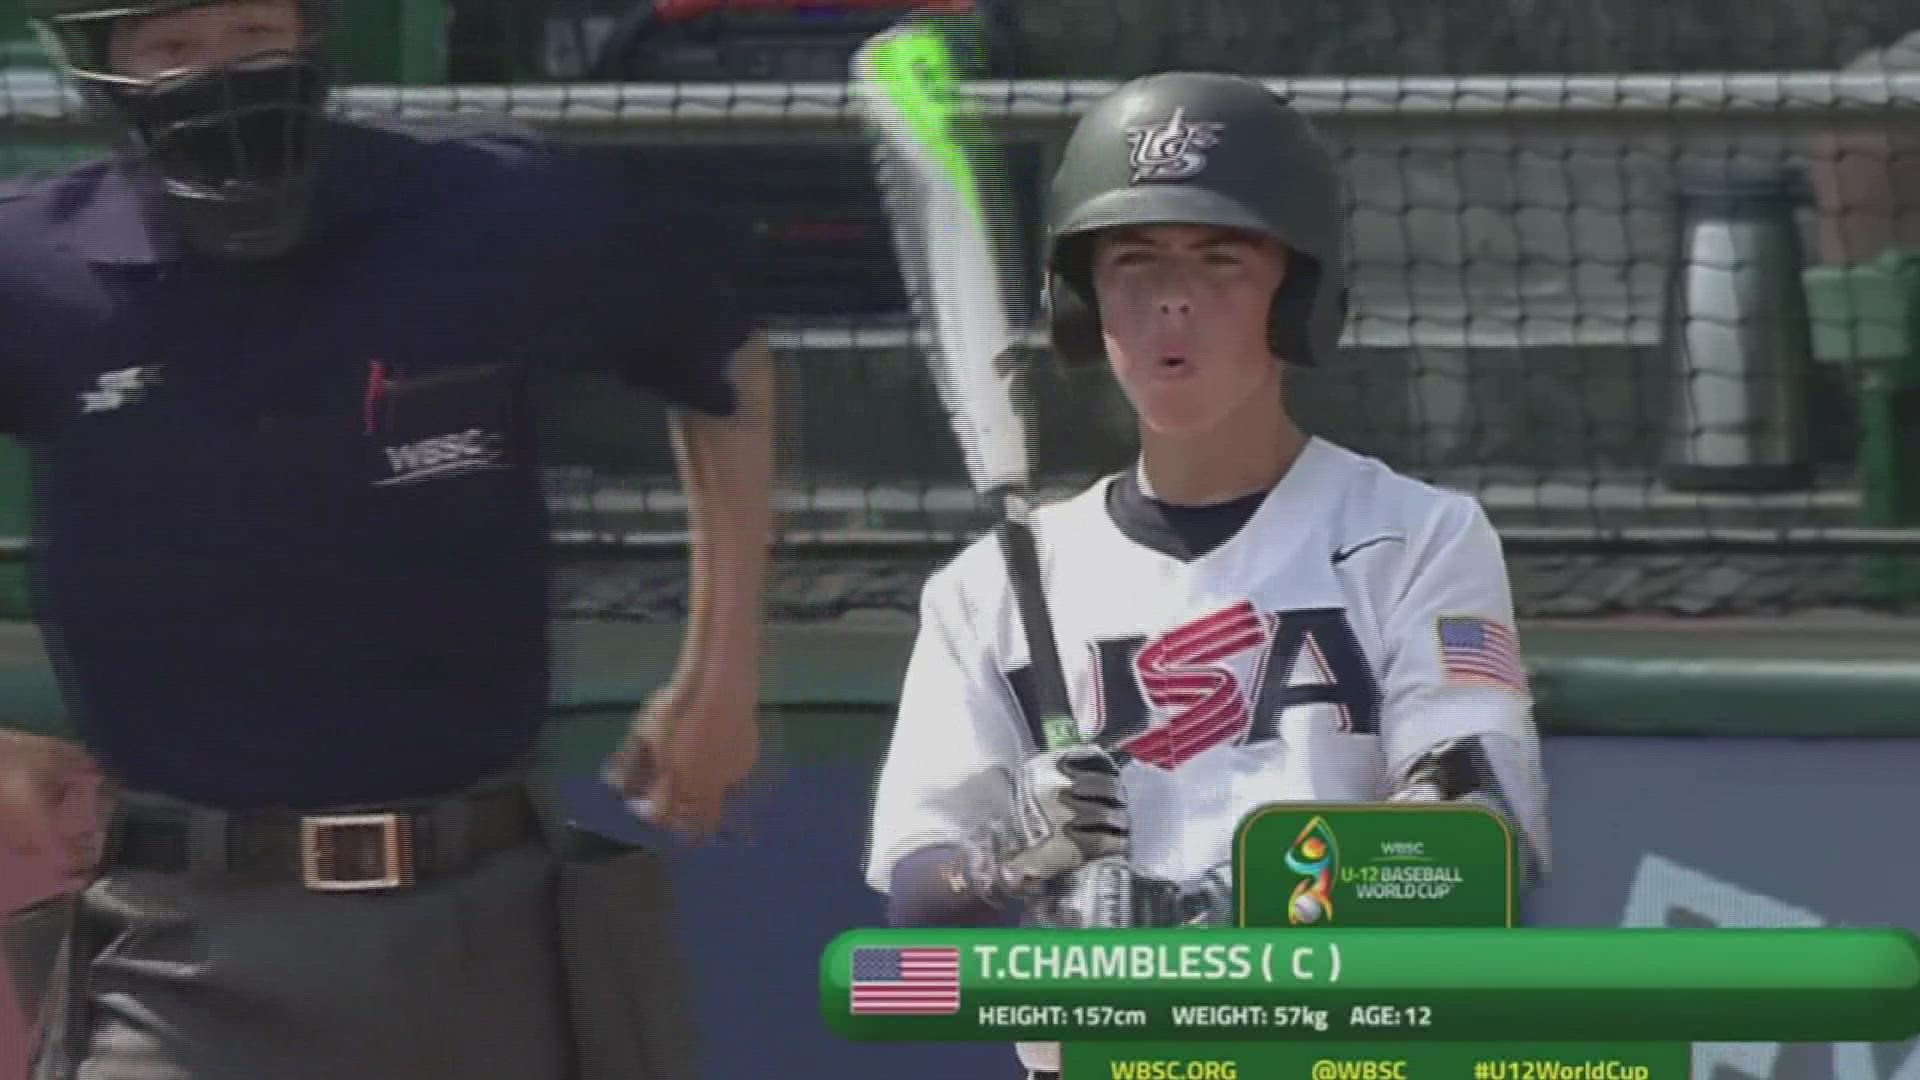 USA Baseball's game one win featured local catcher.